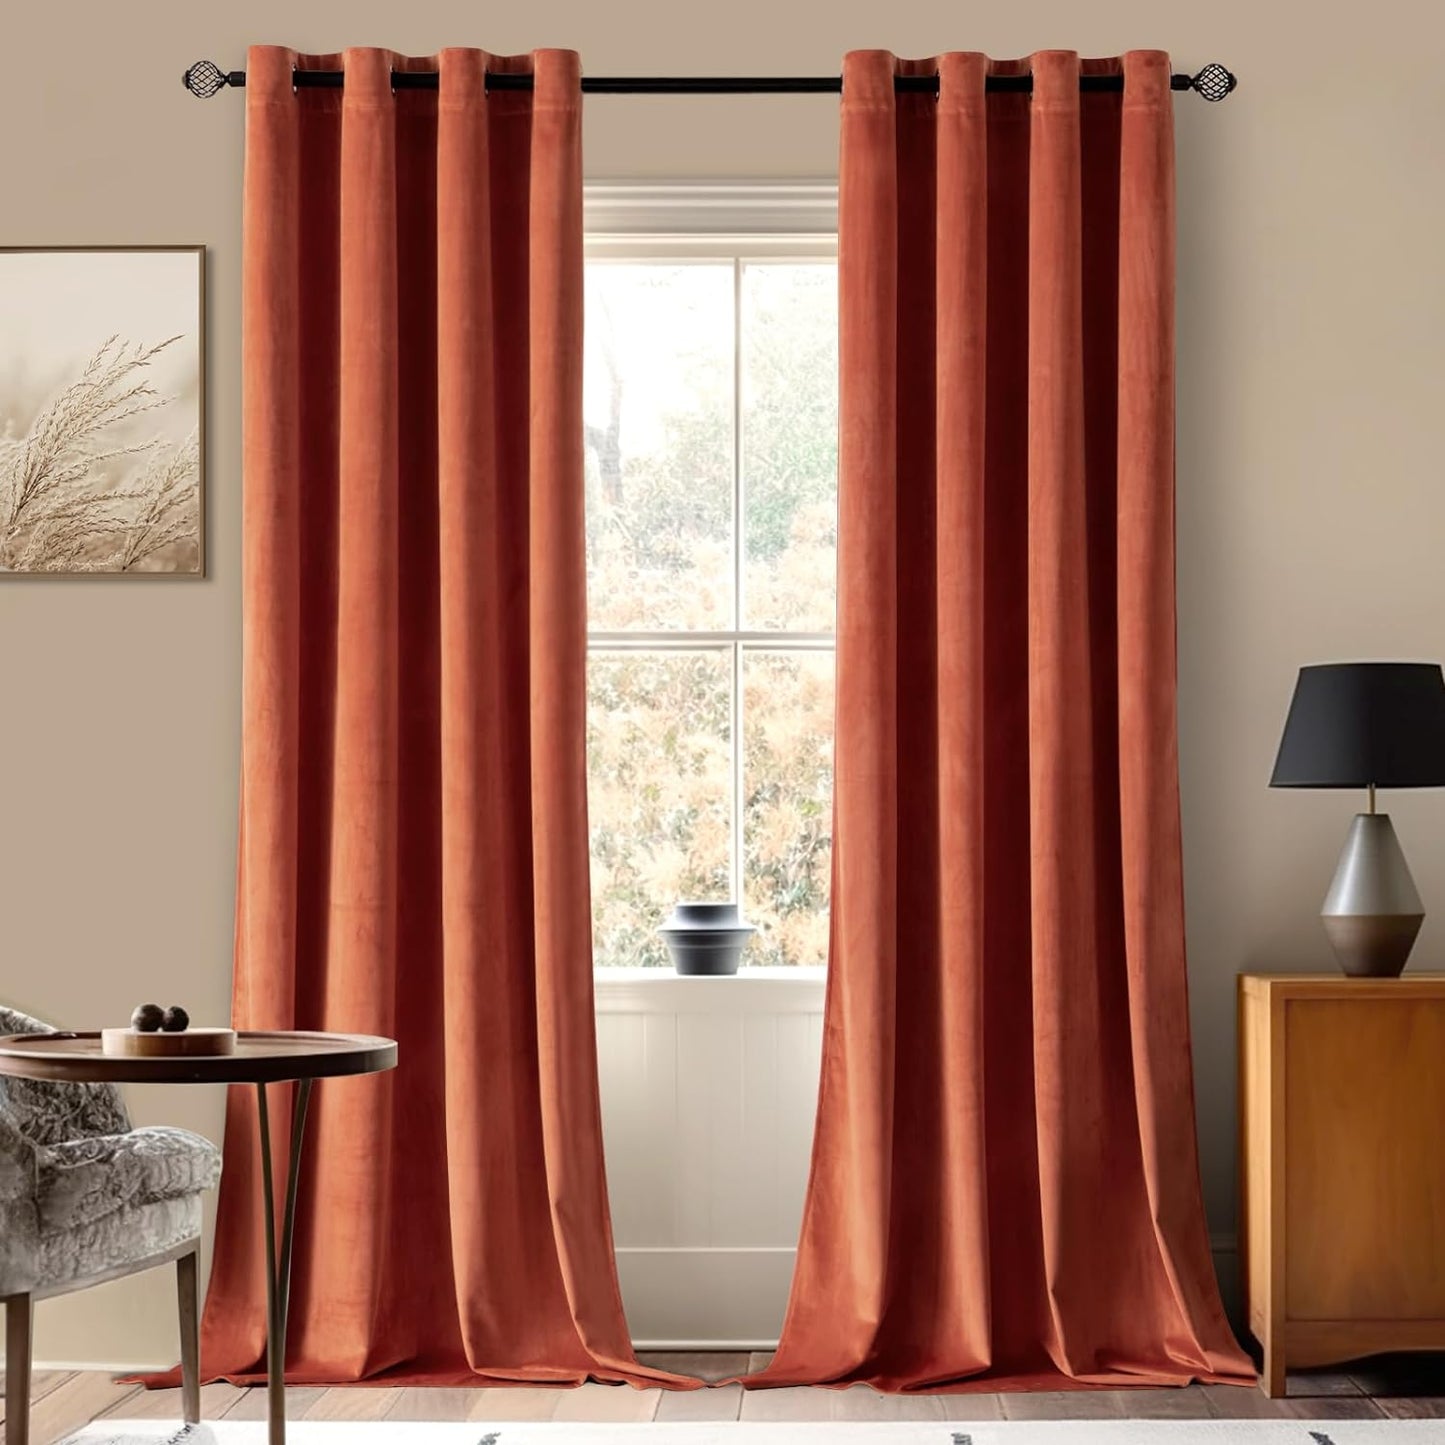 MIULEE Velvet Curtains Olive Green Elegant Grommet Curtains Thermal Insulated Soundproof Room Darkening Curtains/Drapes for Classical Living Room Bedroom Decor 52 X 84 Inch Set of 2  MIULEE Terracotta W52 X L84 